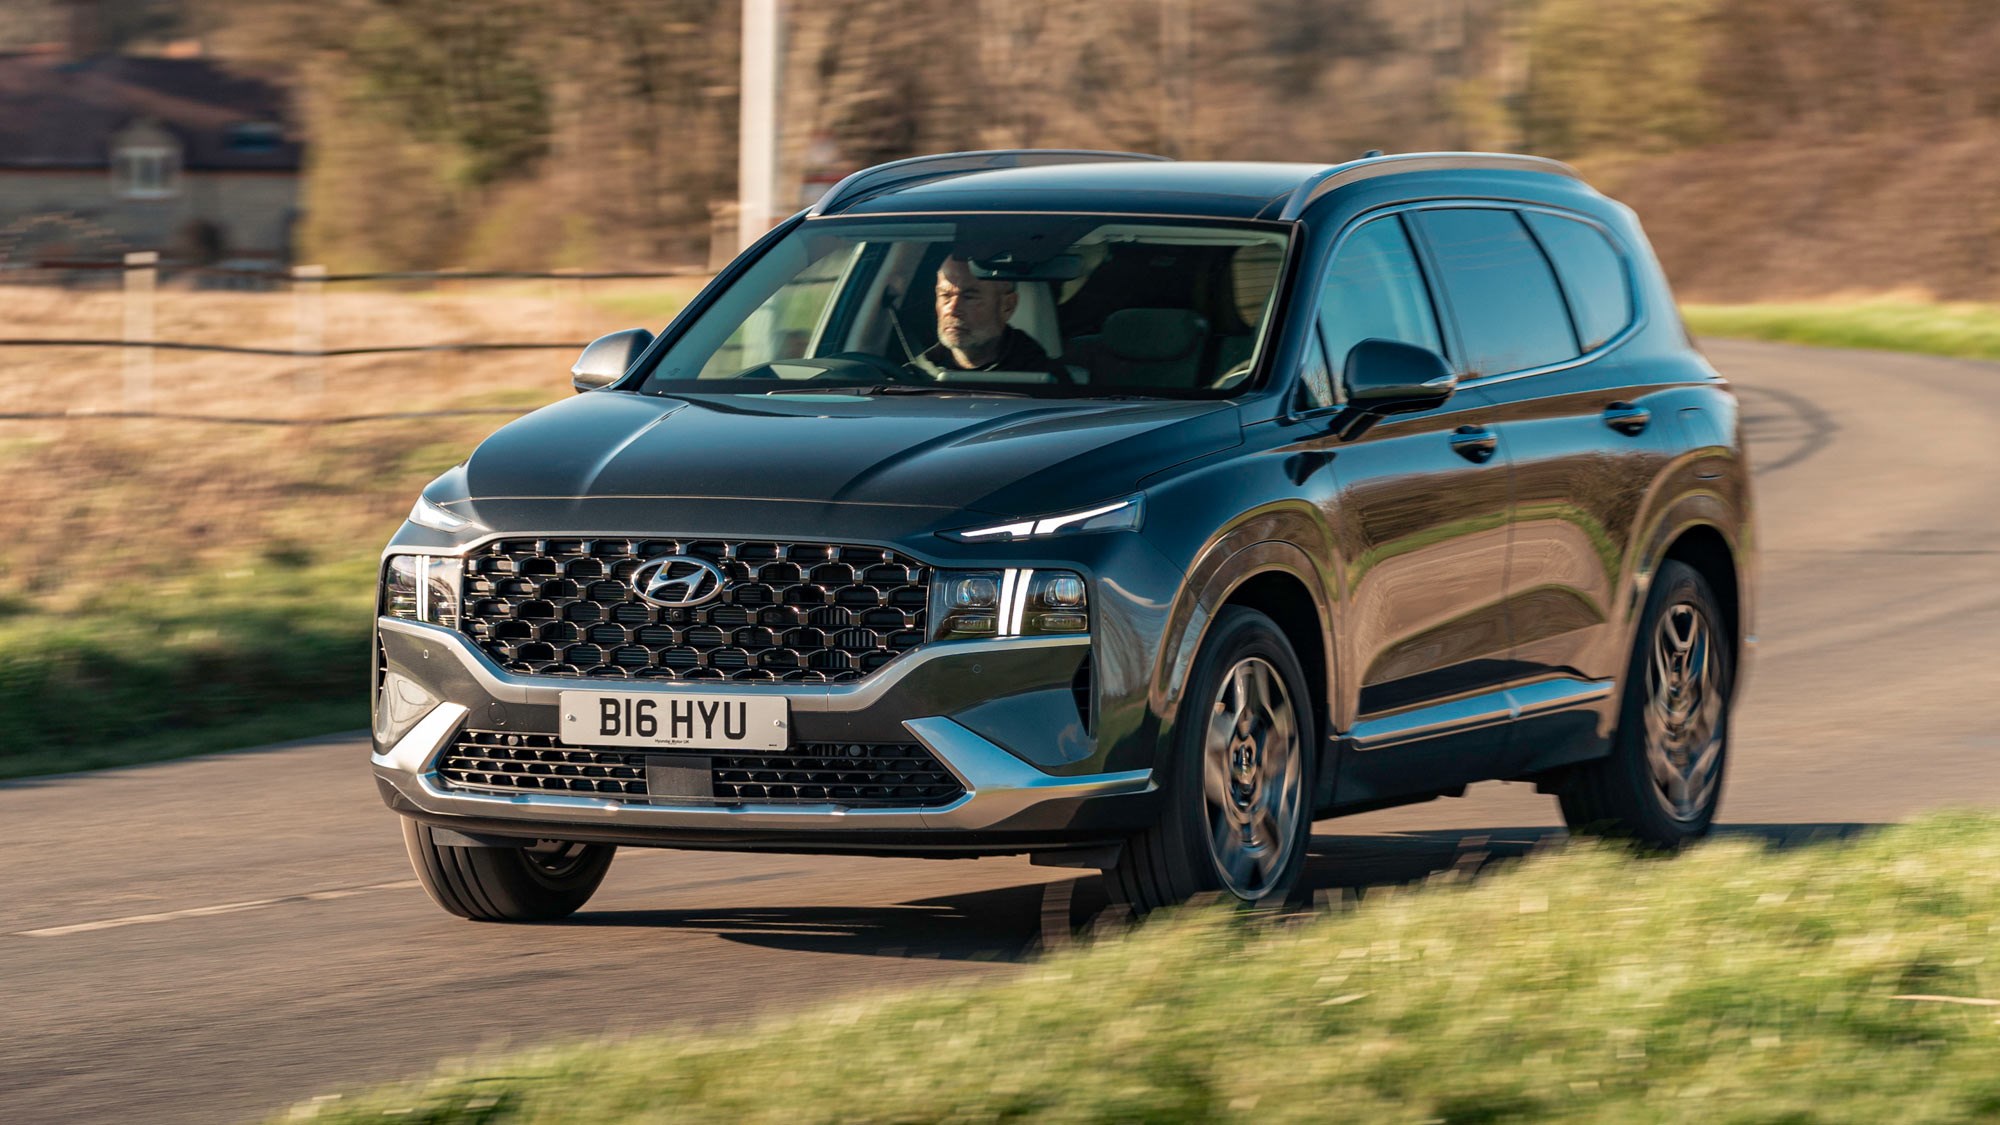 Which 2022 Hyundai Hybrid SUV is Right for You?